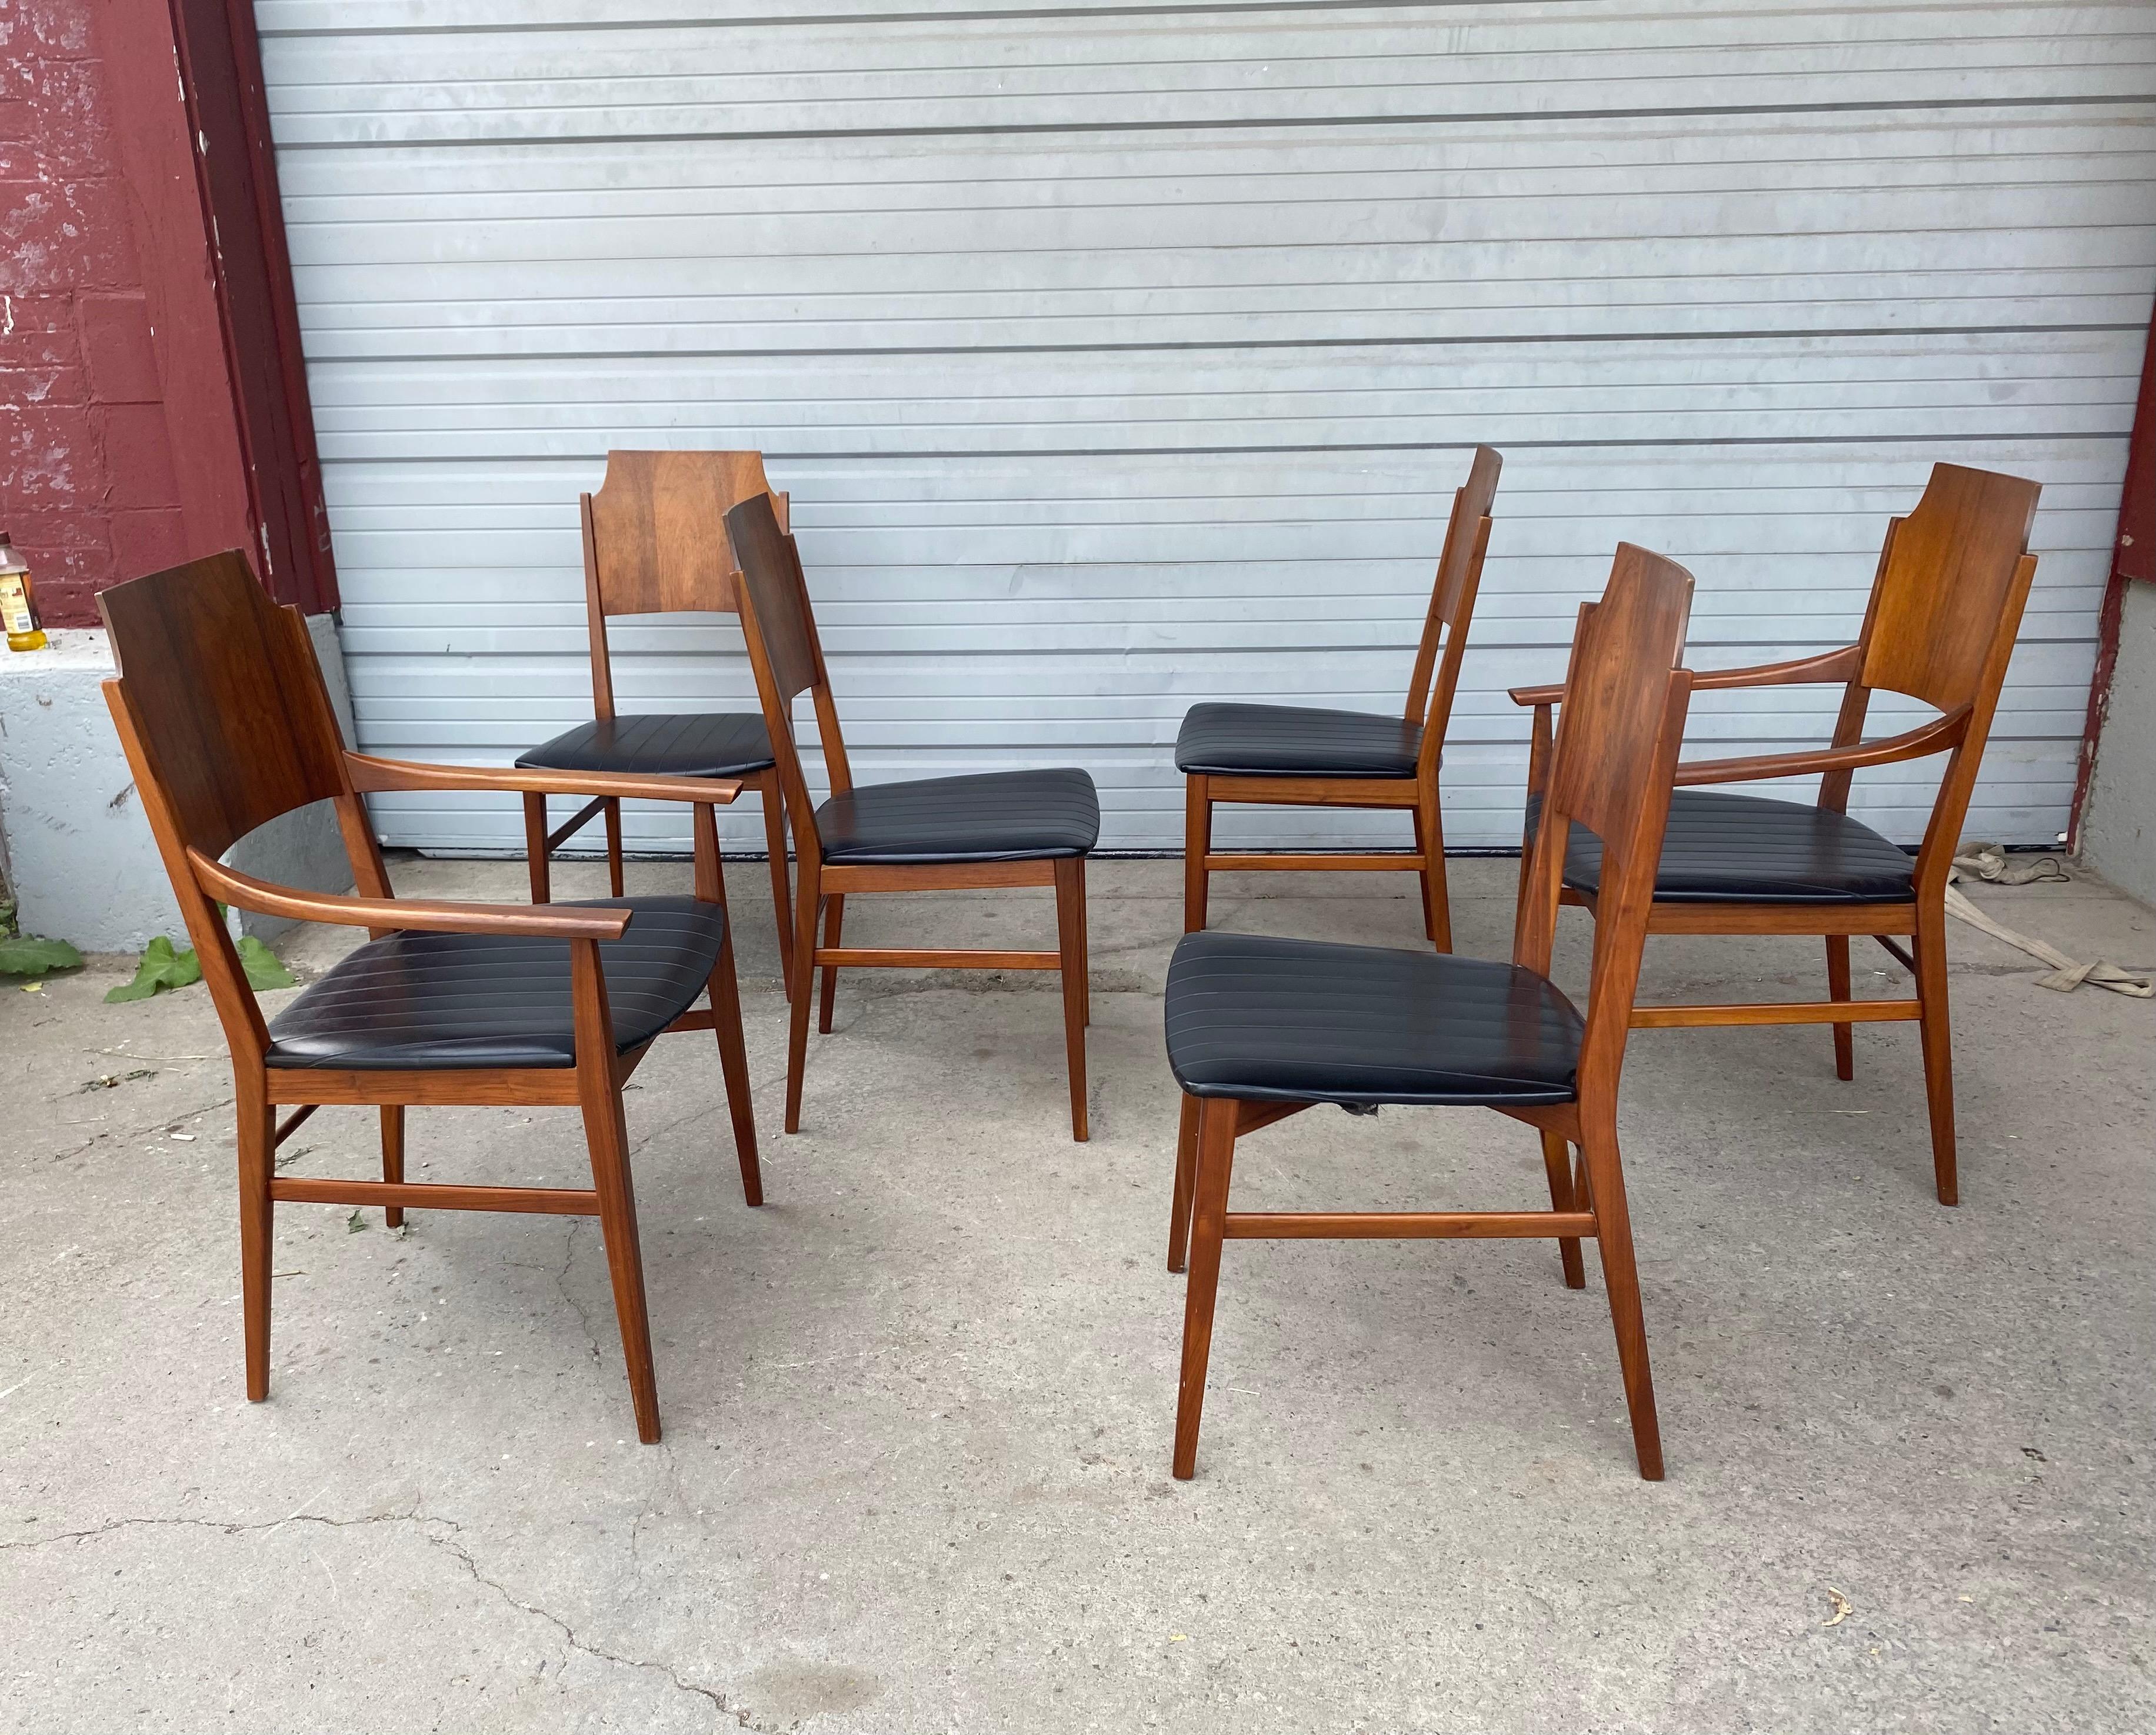 Naugahyde Set 6 Rosewood Dining Chairs, Paul McCobb, Delineator For Sale